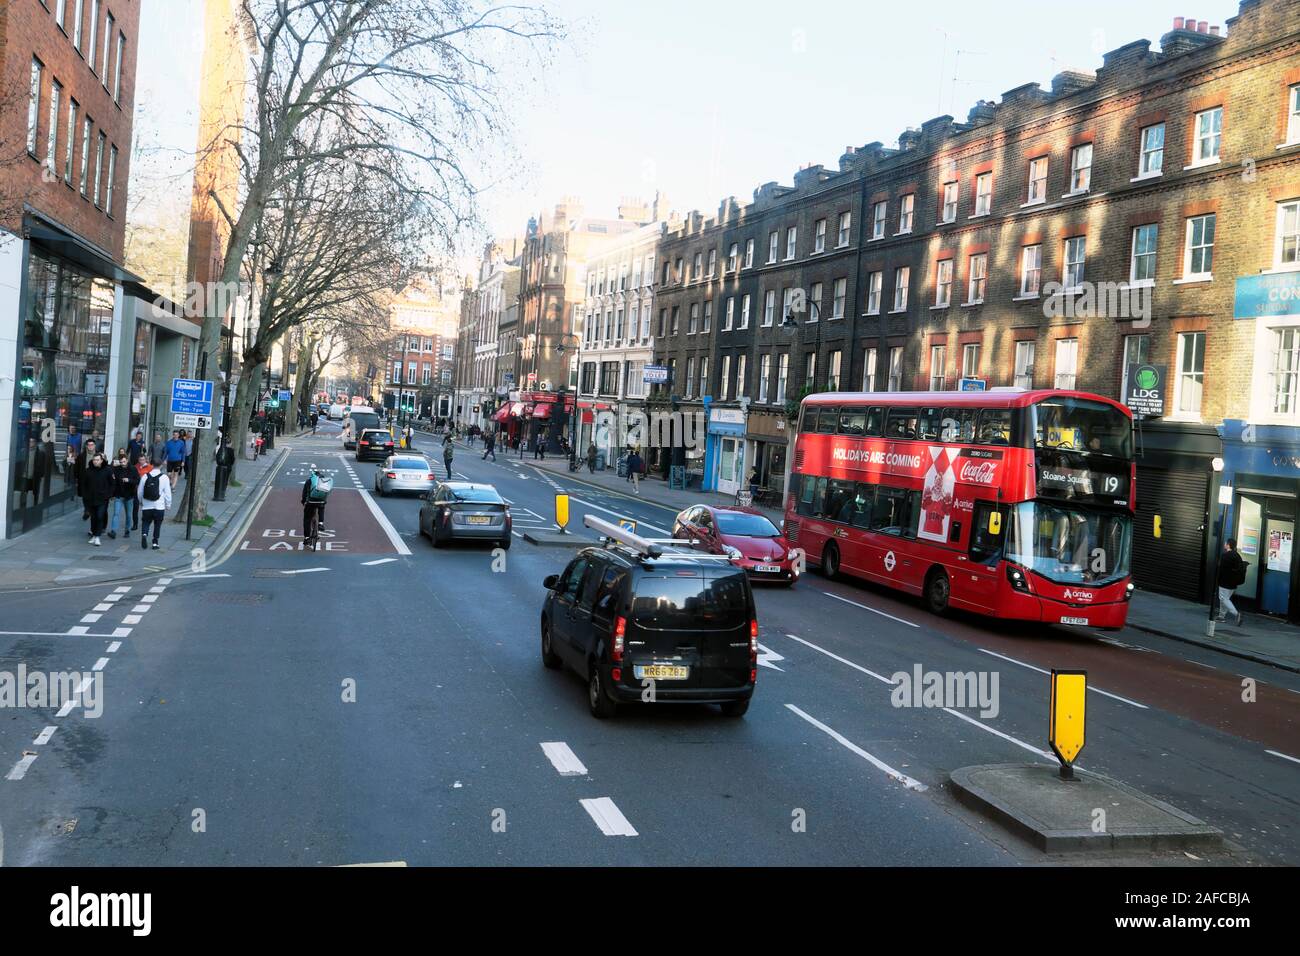 View of traffic and number 19 bus on Grays Inn Road in London London WC1 England UK  KATHY DEWITT Stock Photo